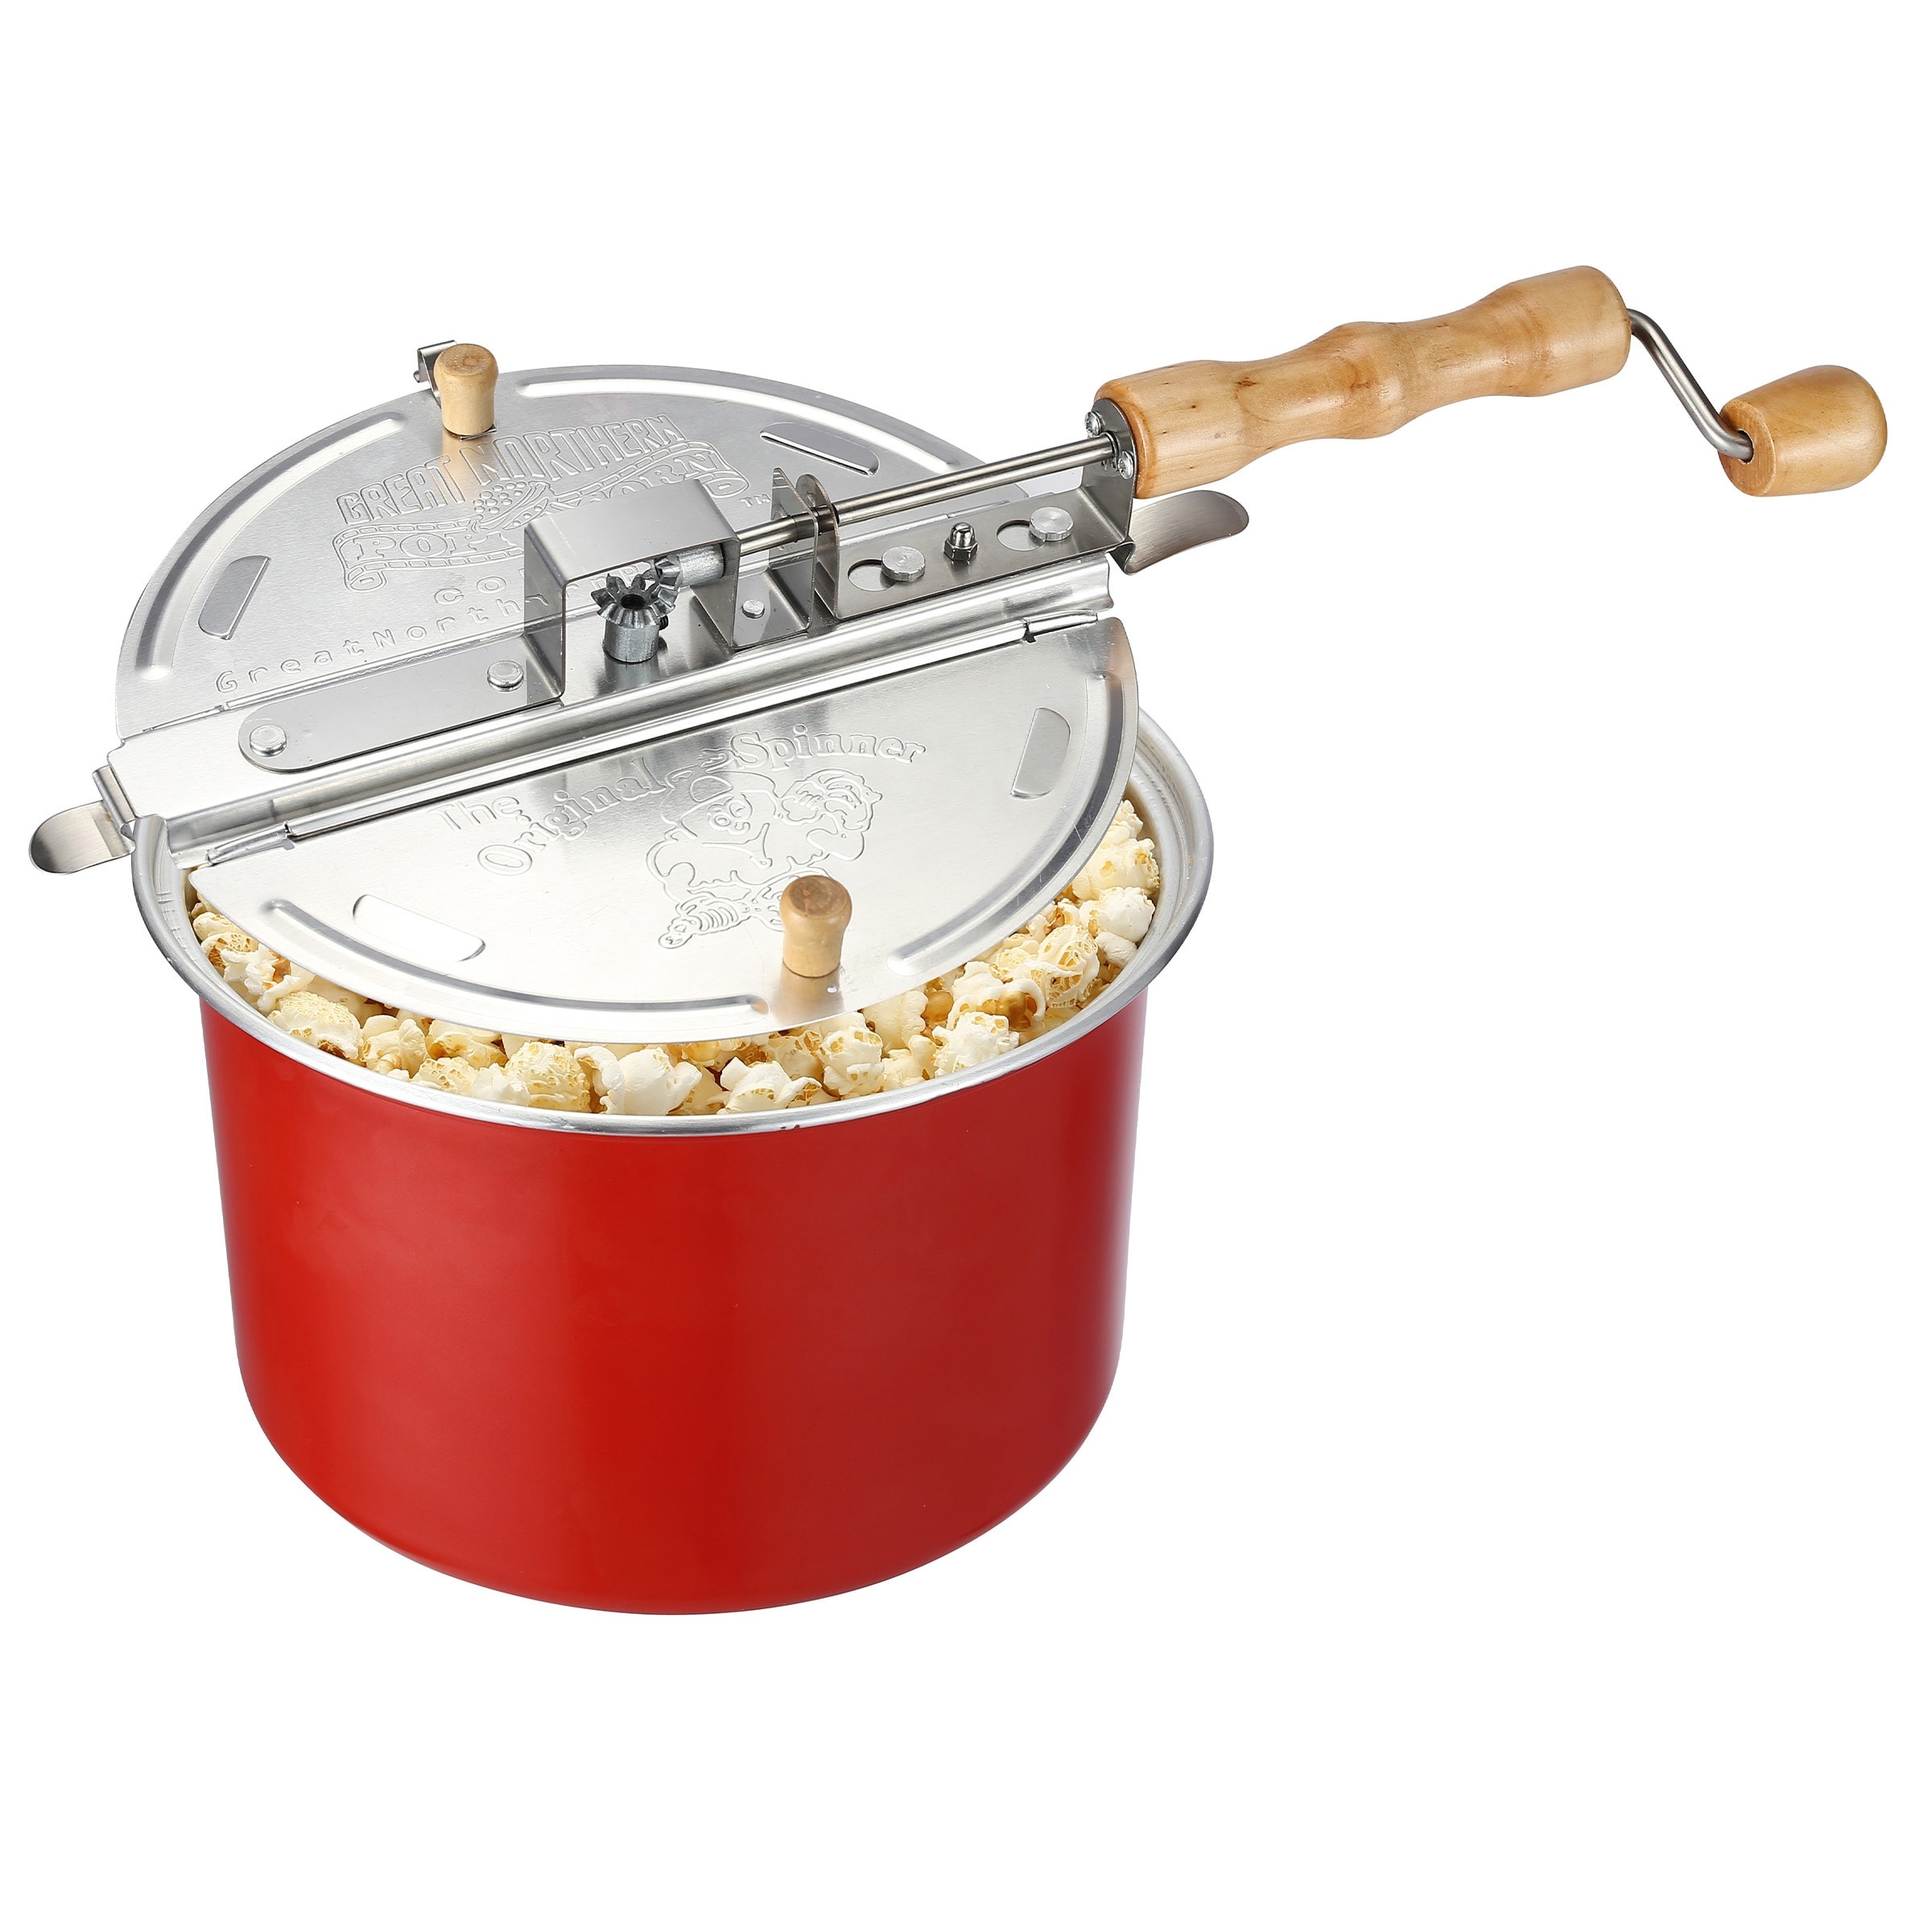 https://ak1.ostkcdn.com/images/products/is/images/direct/12be562a6b1efe221bbec0ac2323c0d610320f2e/6.5-Quart-Stovetop-Popcorn-Maker-by-Great-Northern-Popcorn-%28Red%29.jpg